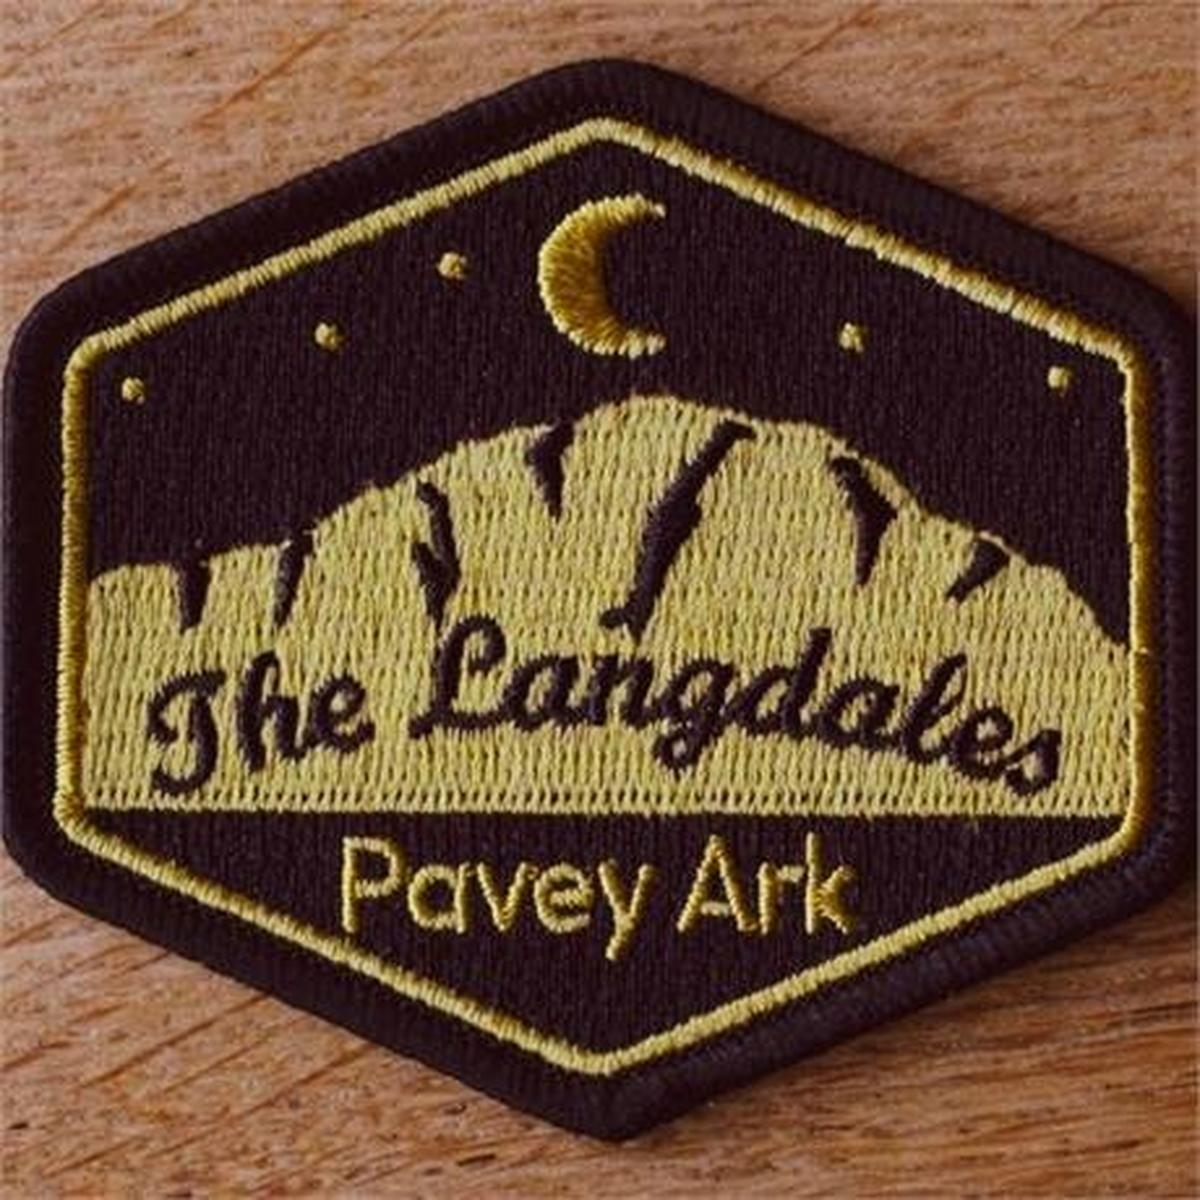 Conquer Lake District Patch - Pavey Ark (The Langdales)